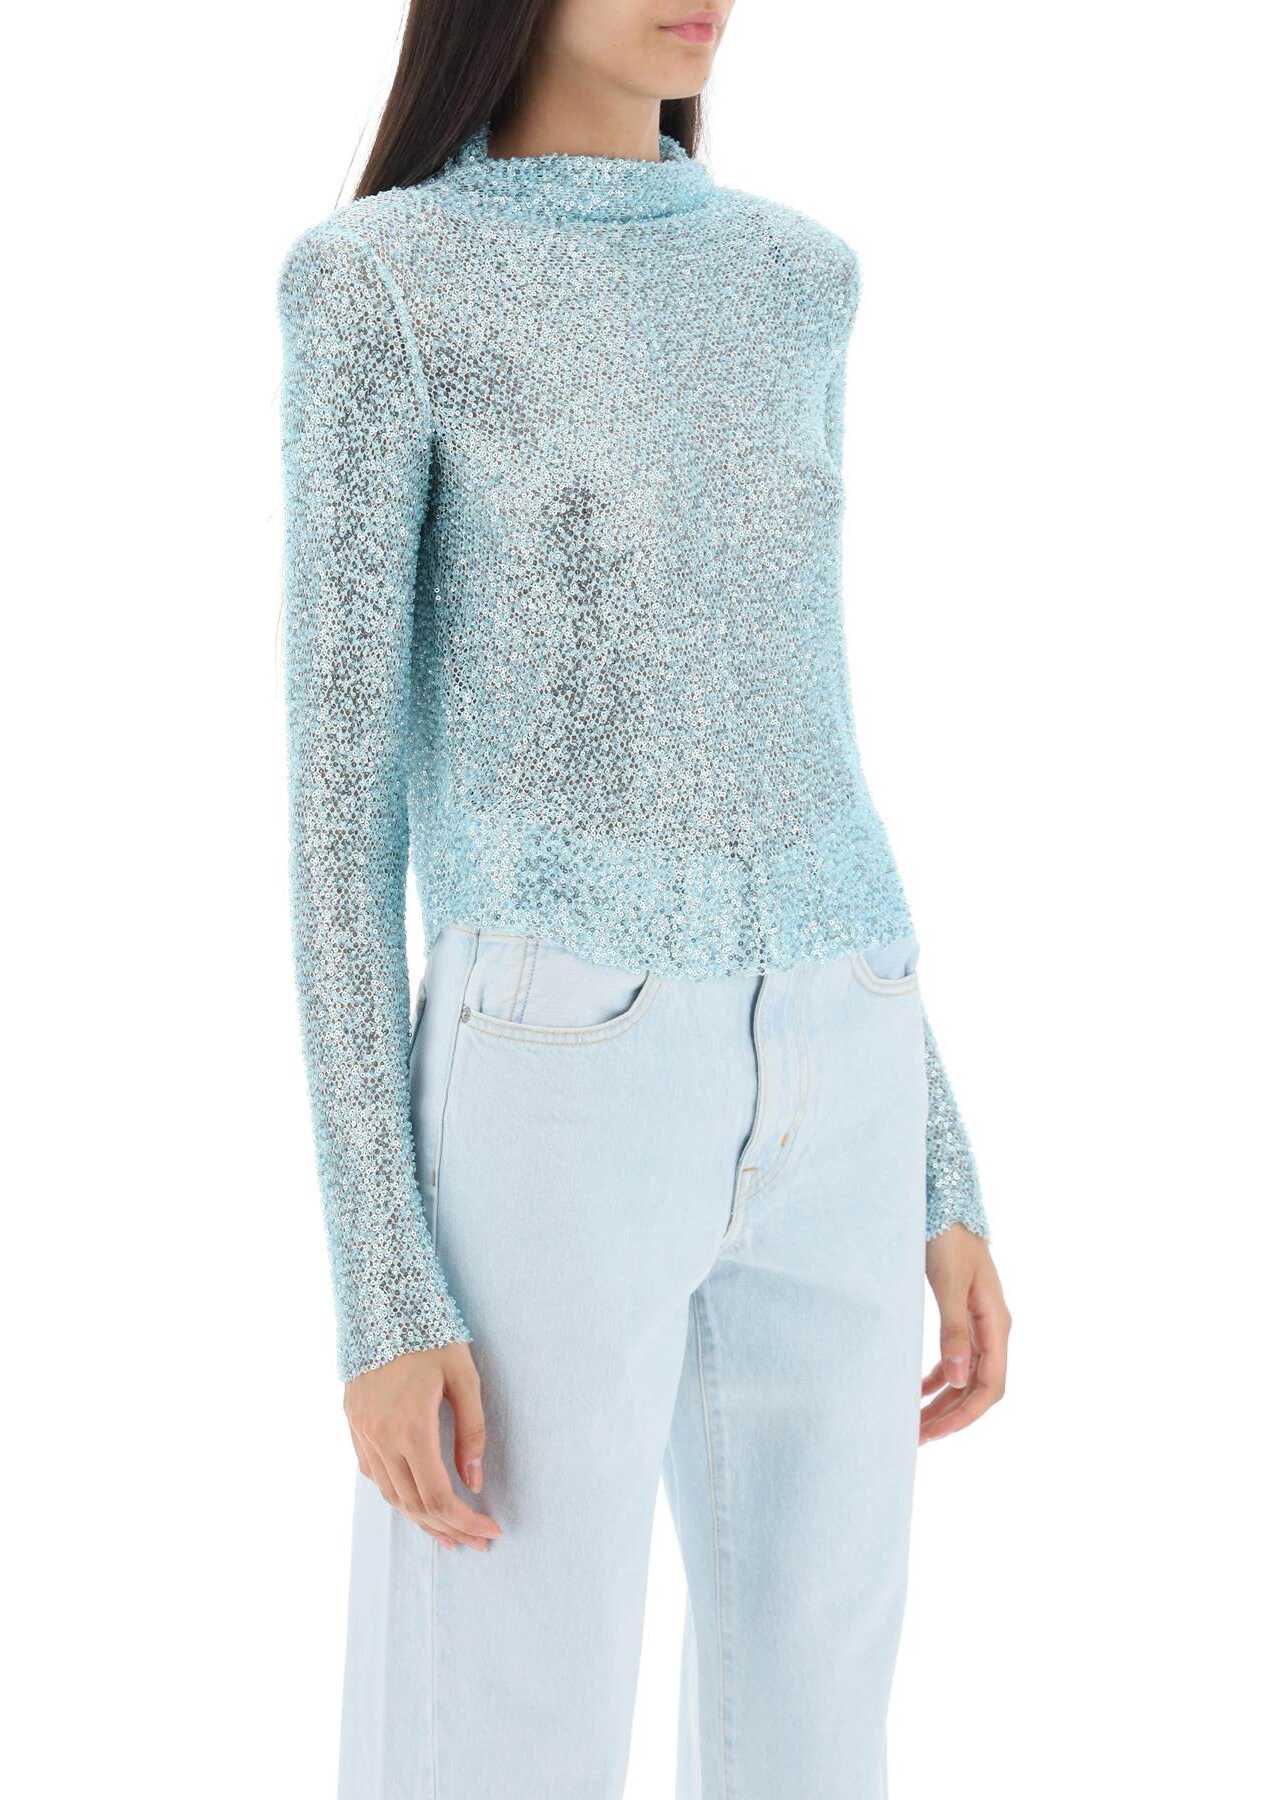 Self-Portrait Long-Sleeved Top With Sequins And Beads BLUE image12